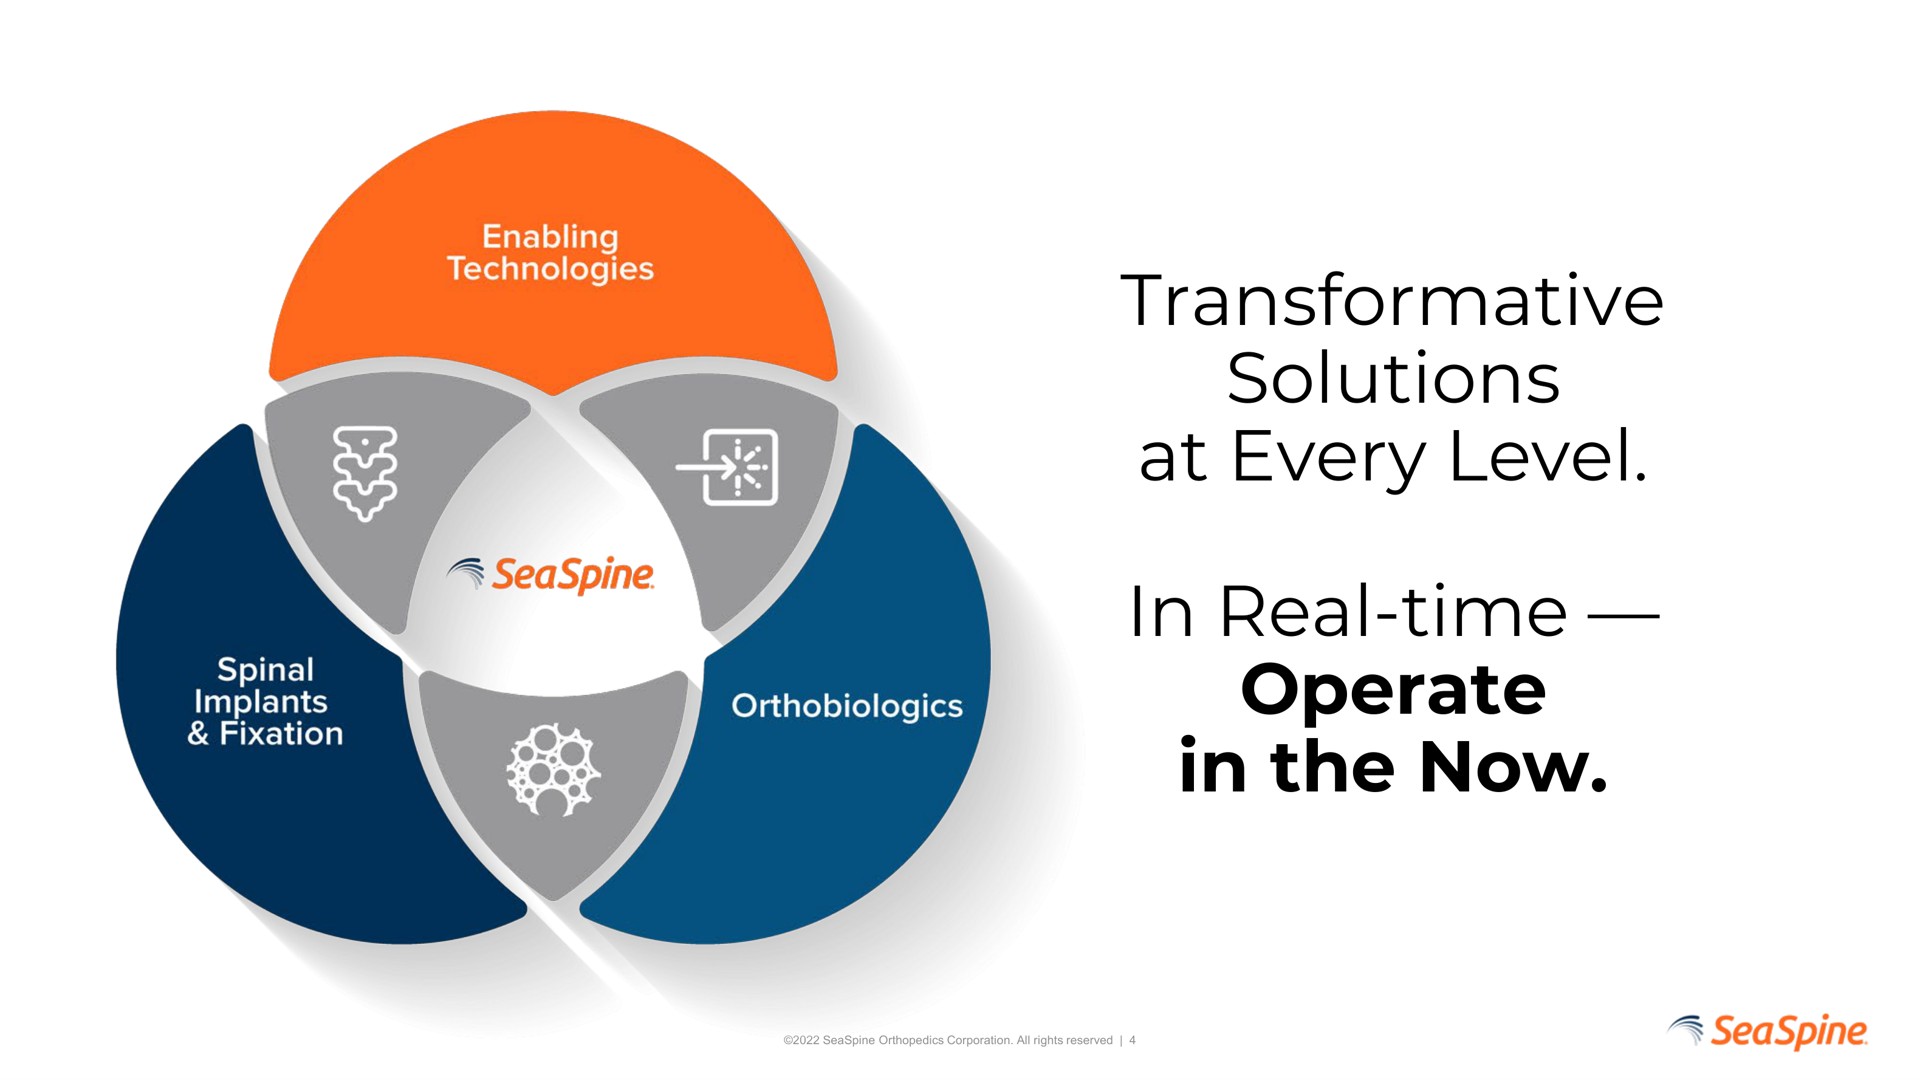 transformative solutions at every level in real time operate in the now | SeaSpine